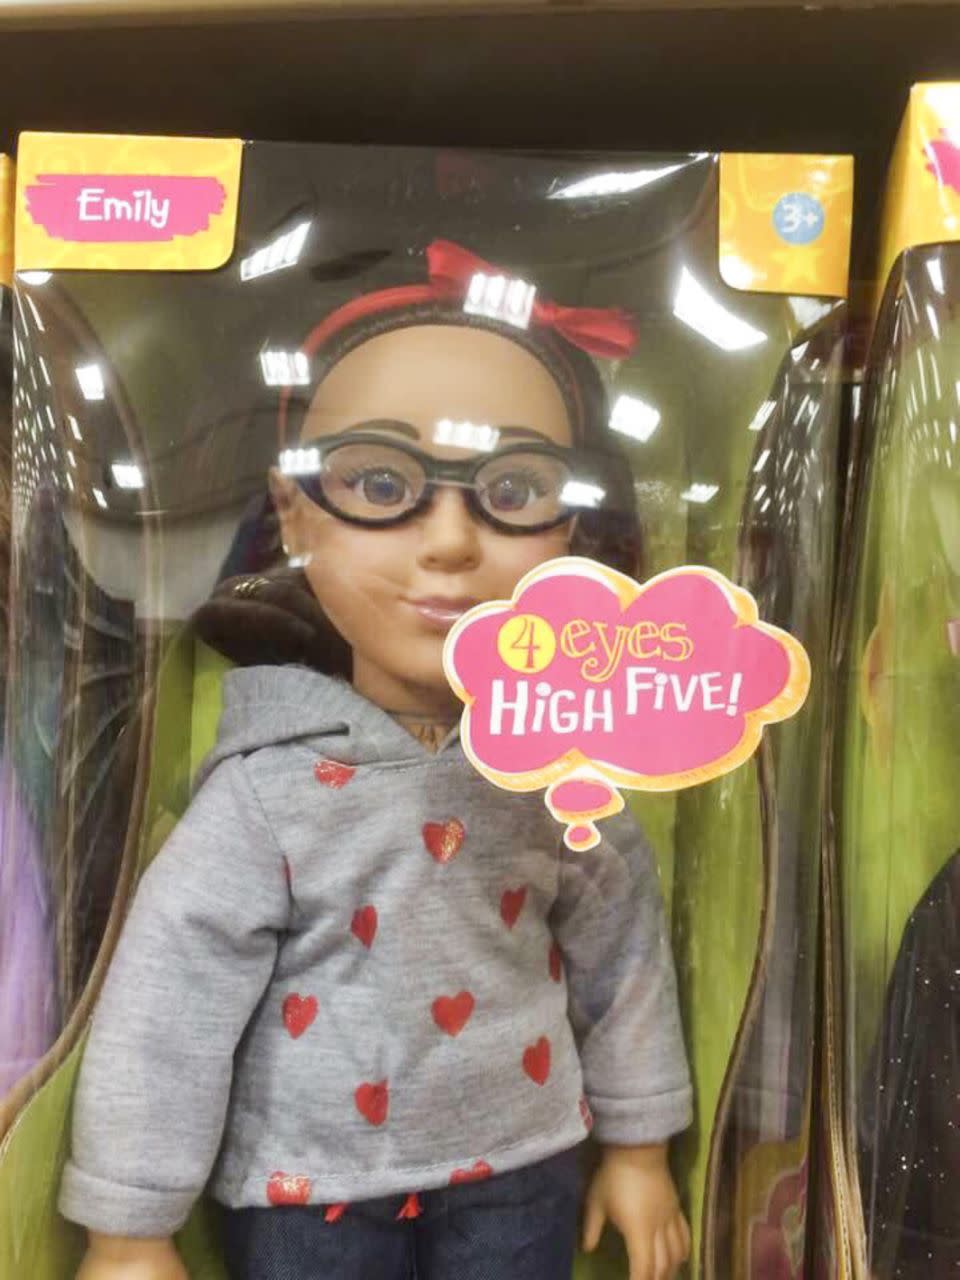 The controversial 4-eyes dolls wear glasses. Photo: Carly Duncan / Caters News